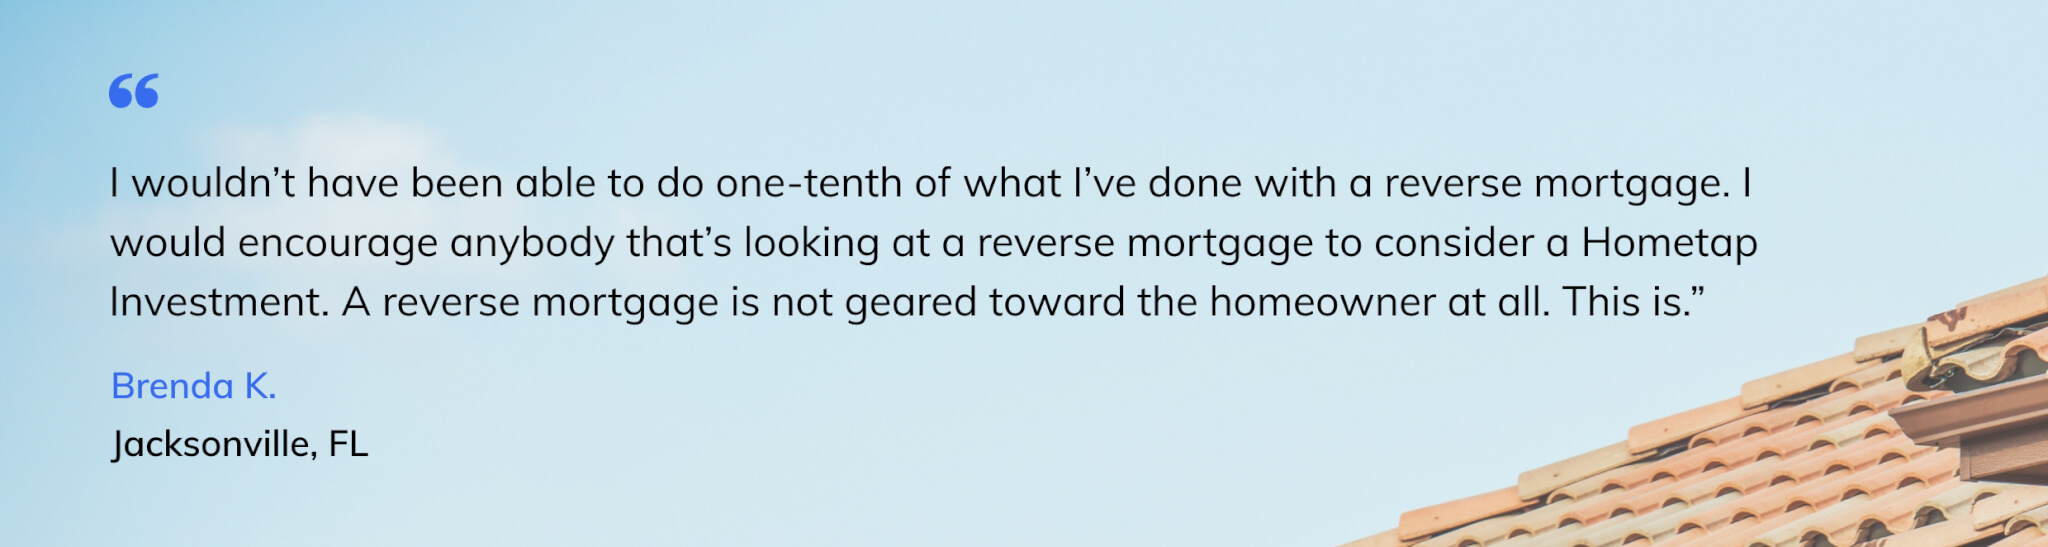 quote from Brenda K. about Hometap